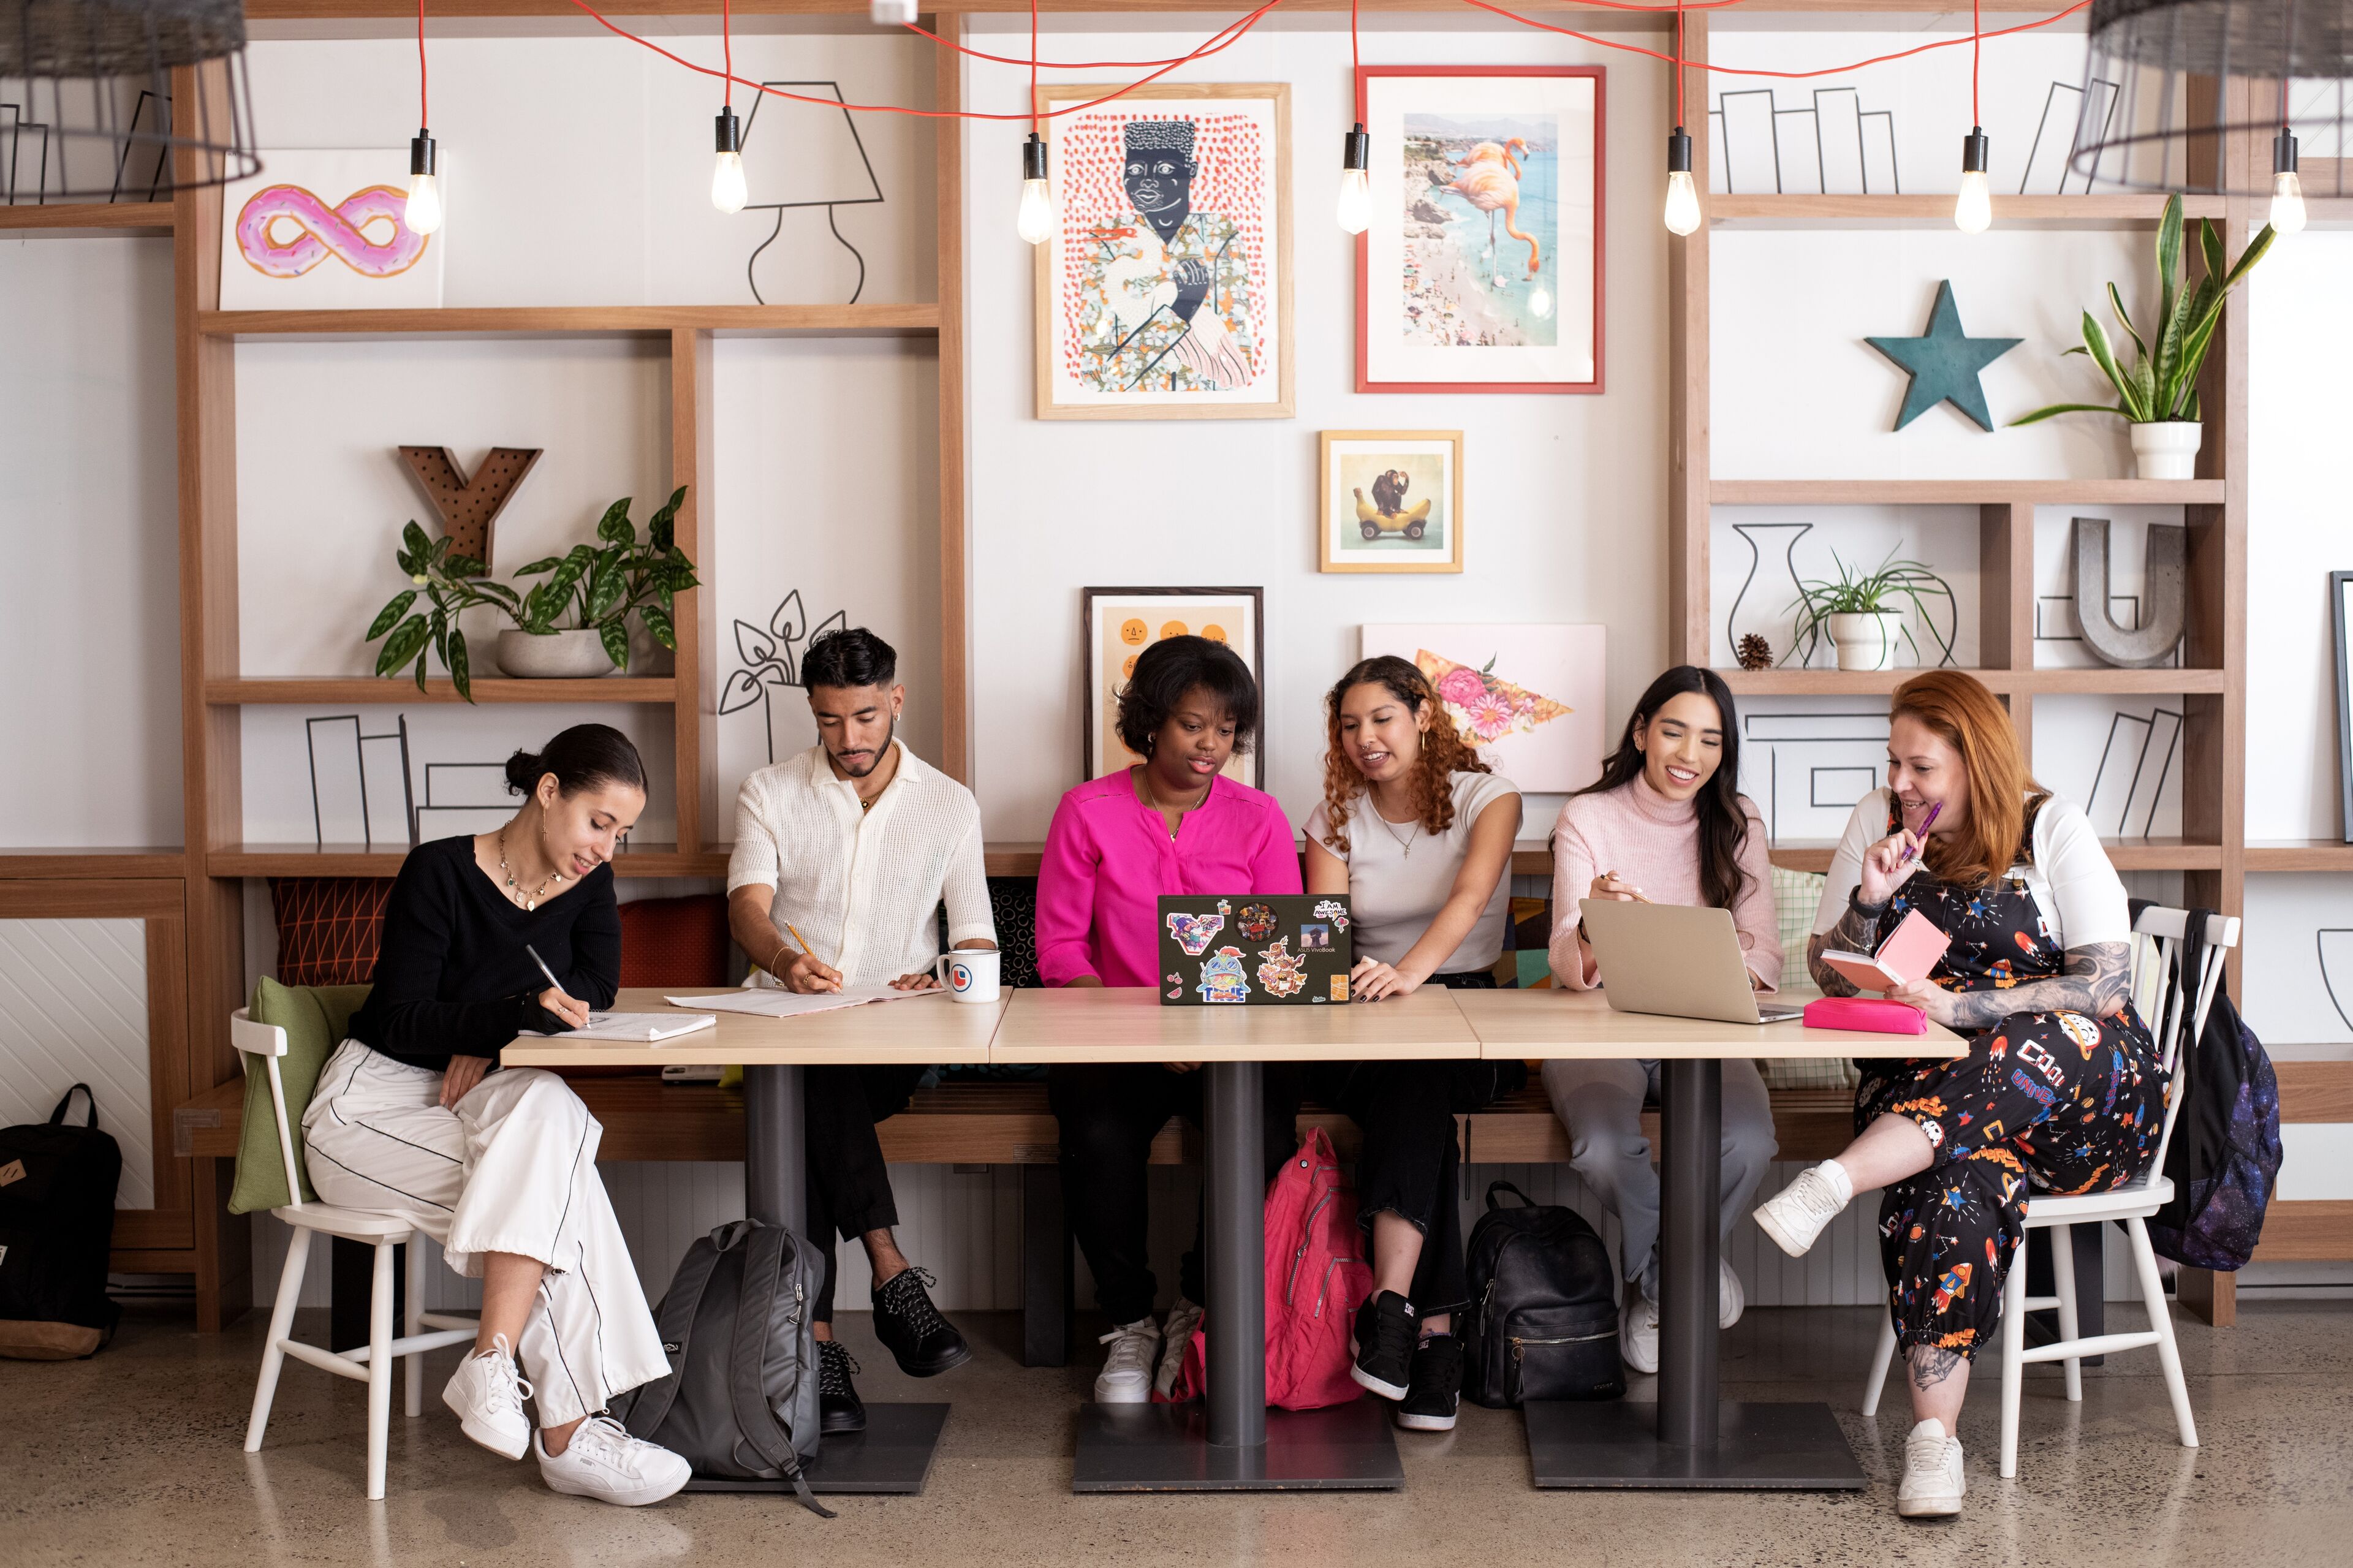 A diverse group of focused individuals engaged in creative work at a modern shared workspace.